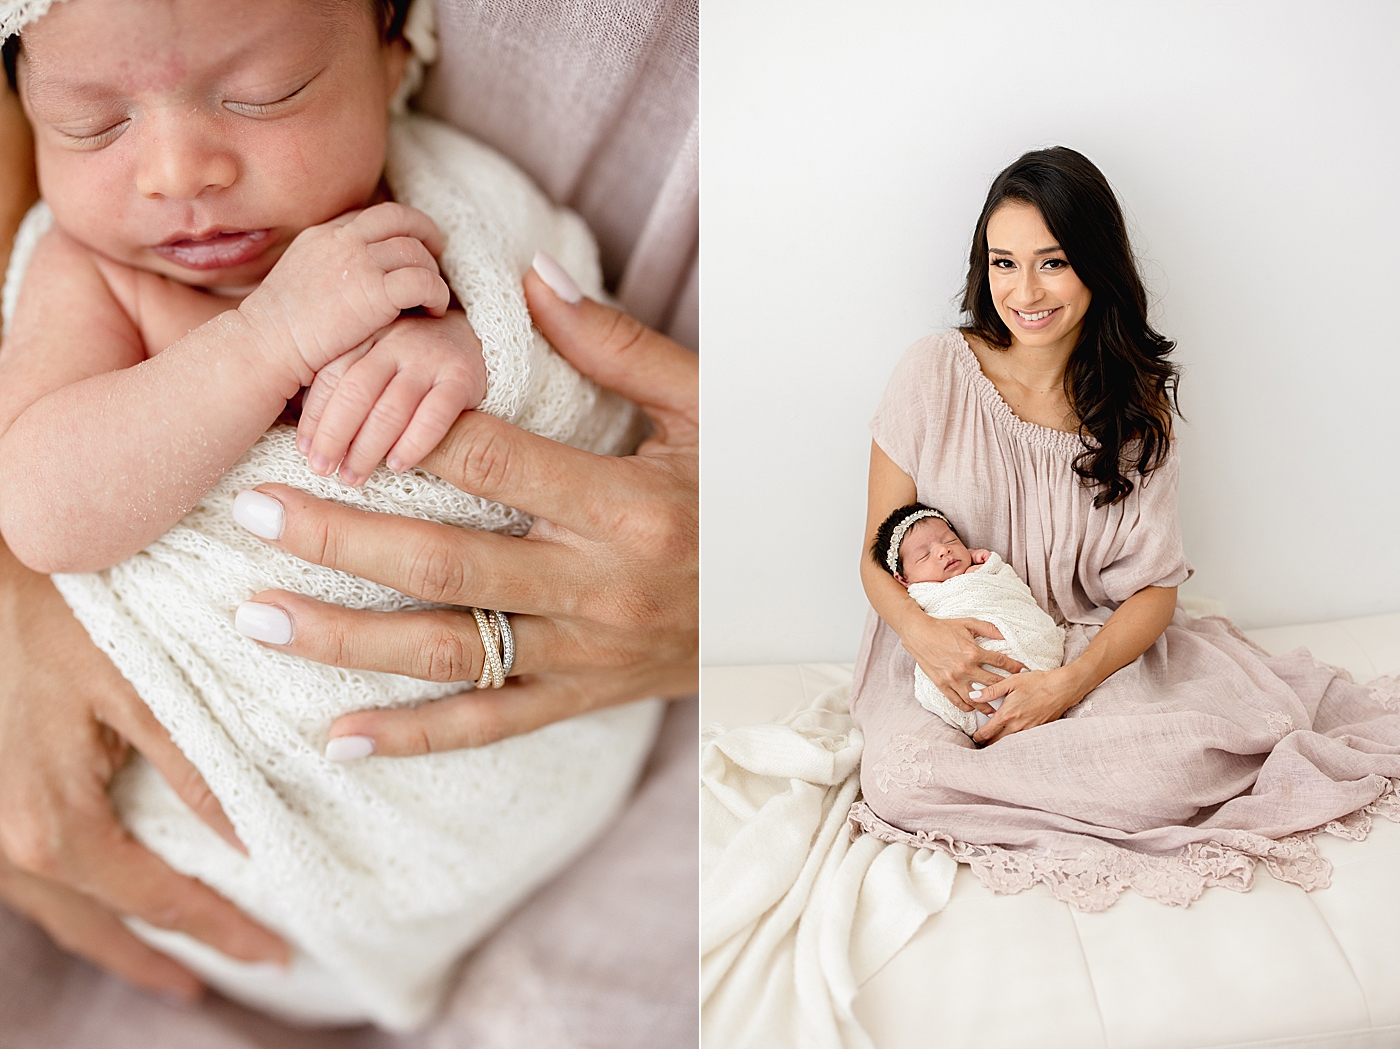 Mother-daughter photo during newborn session. Photo by Brittany Elise Photography.